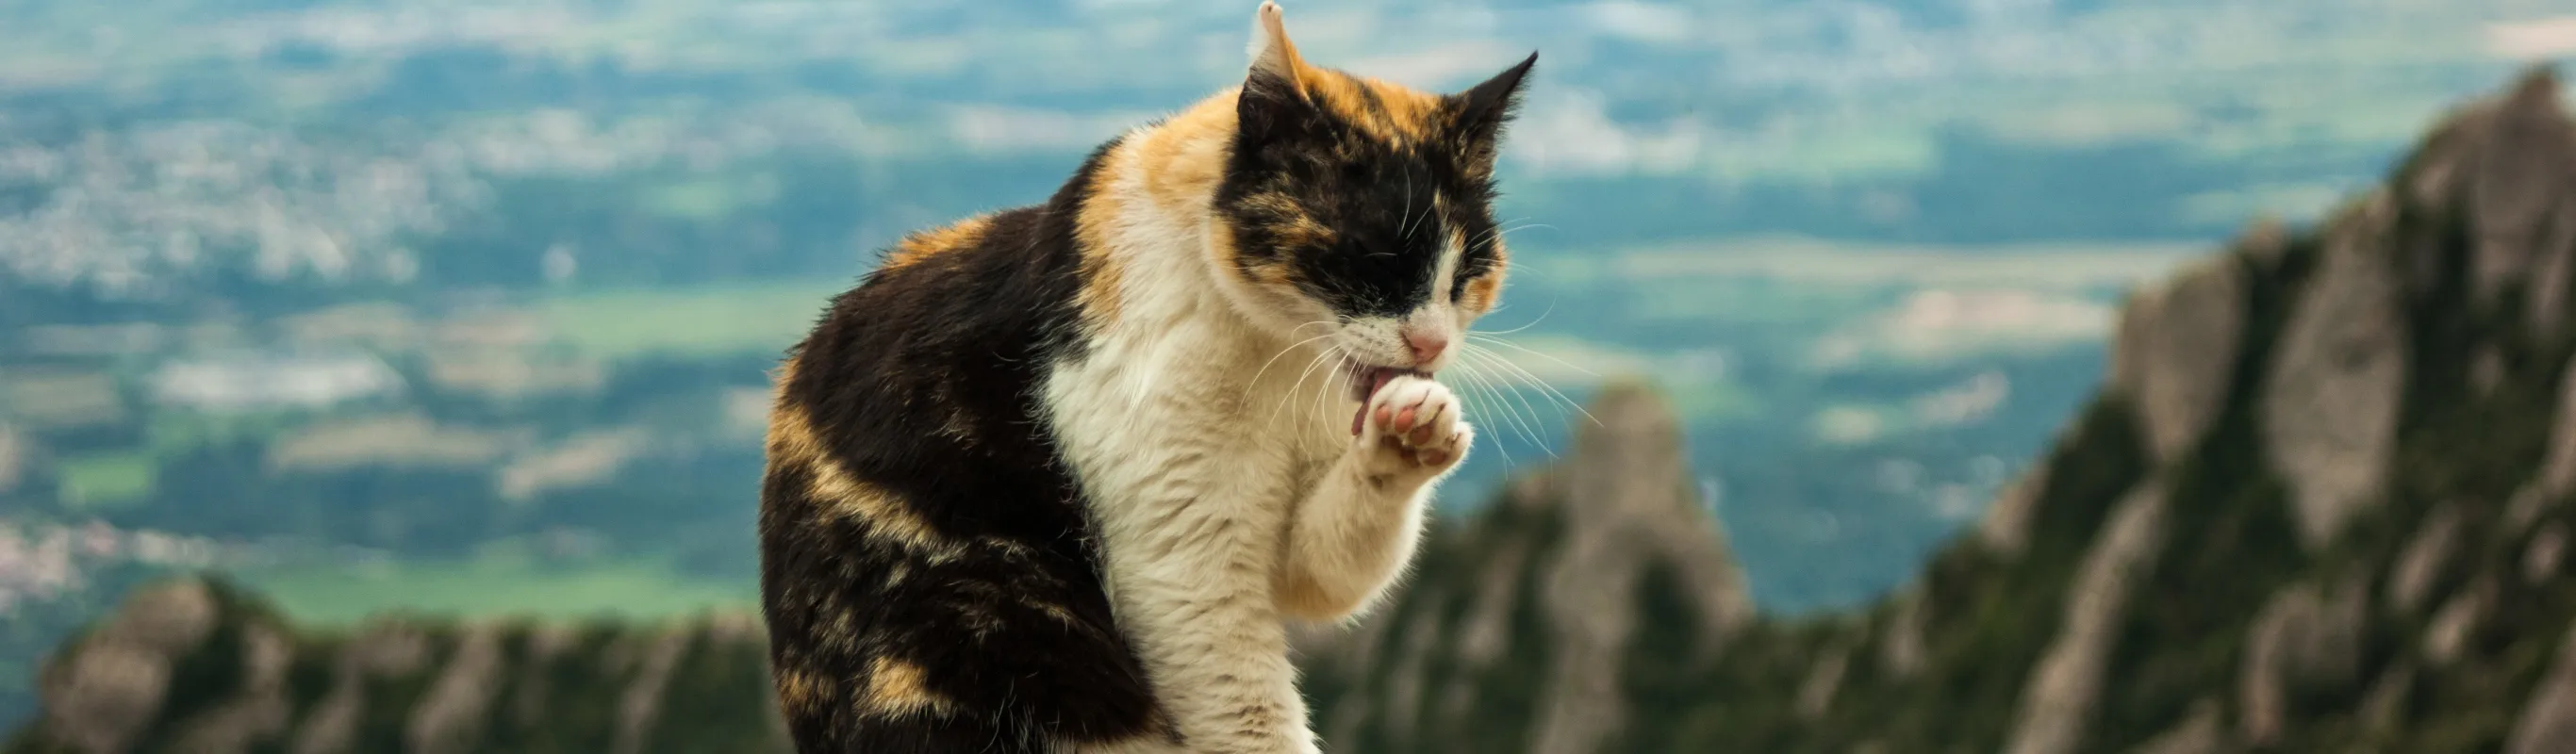 Cat licking its paw